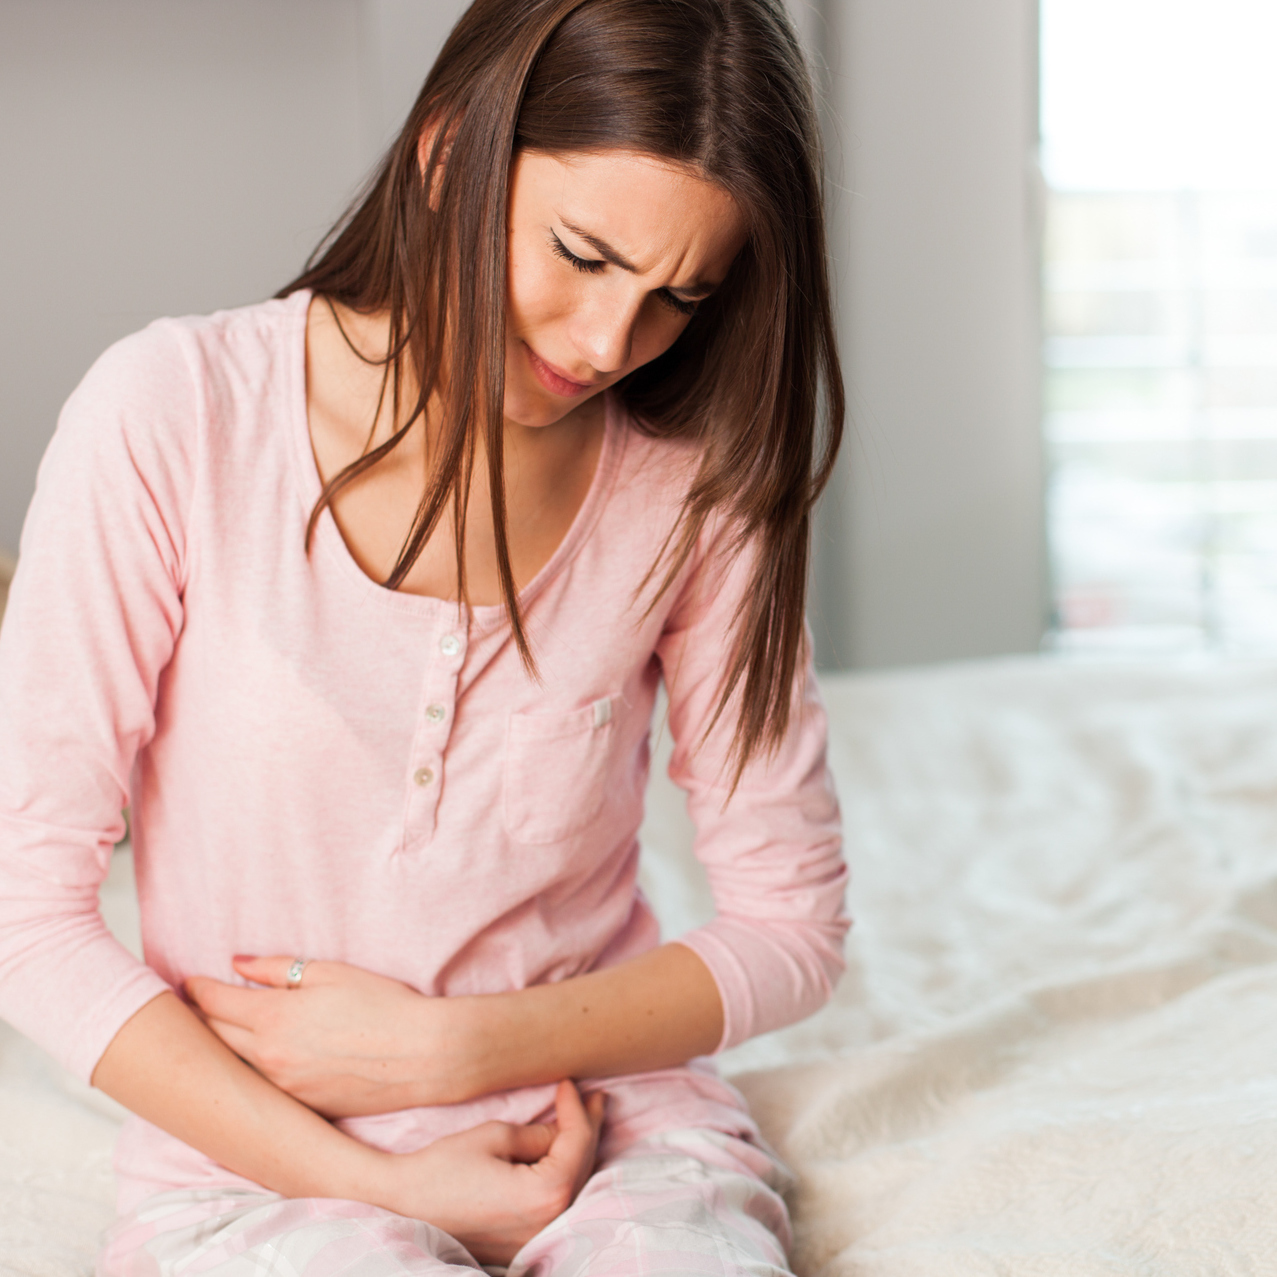 young woman sitting on bed with stomachache holding stomach